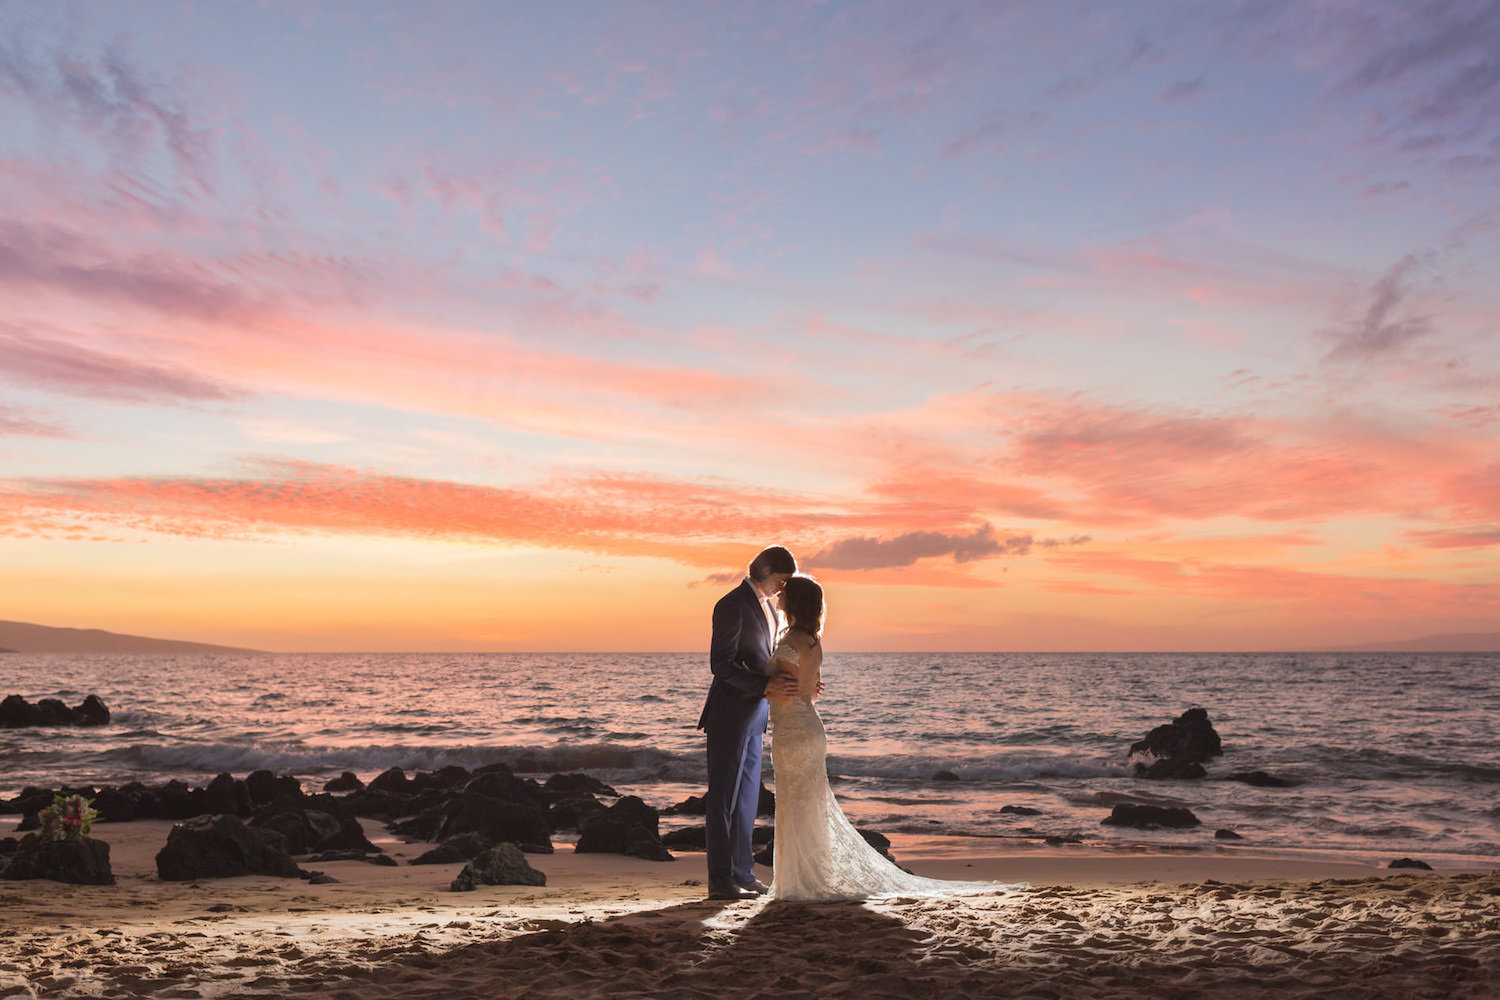 Find The Top Maui Beach Wedding Venues Locations In Hawaii